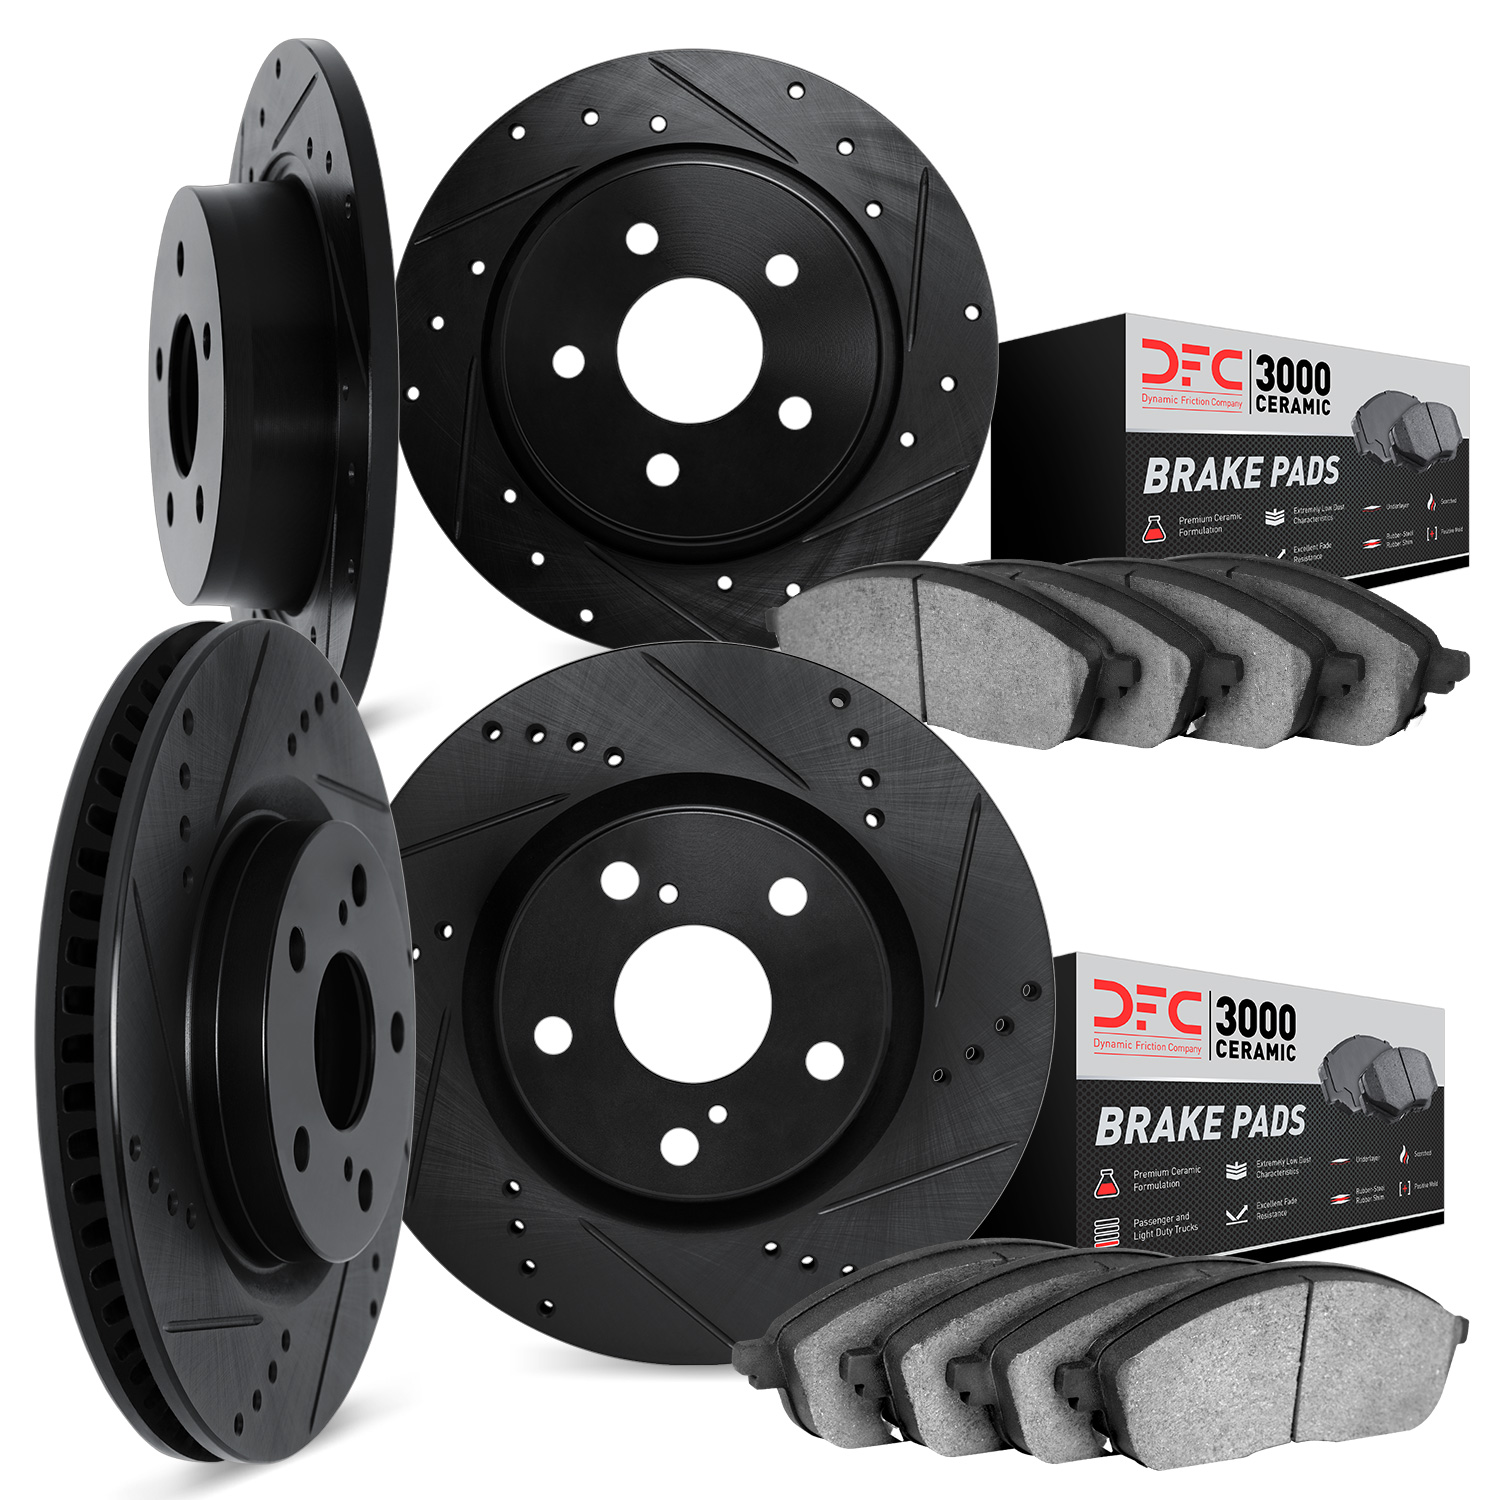 8304-13046 Drilled/Slotted Brake Rotors with 3000-Series Ceramic Brake Pads Kit [Black], 2013-2018 Subaru, Position: Front and R